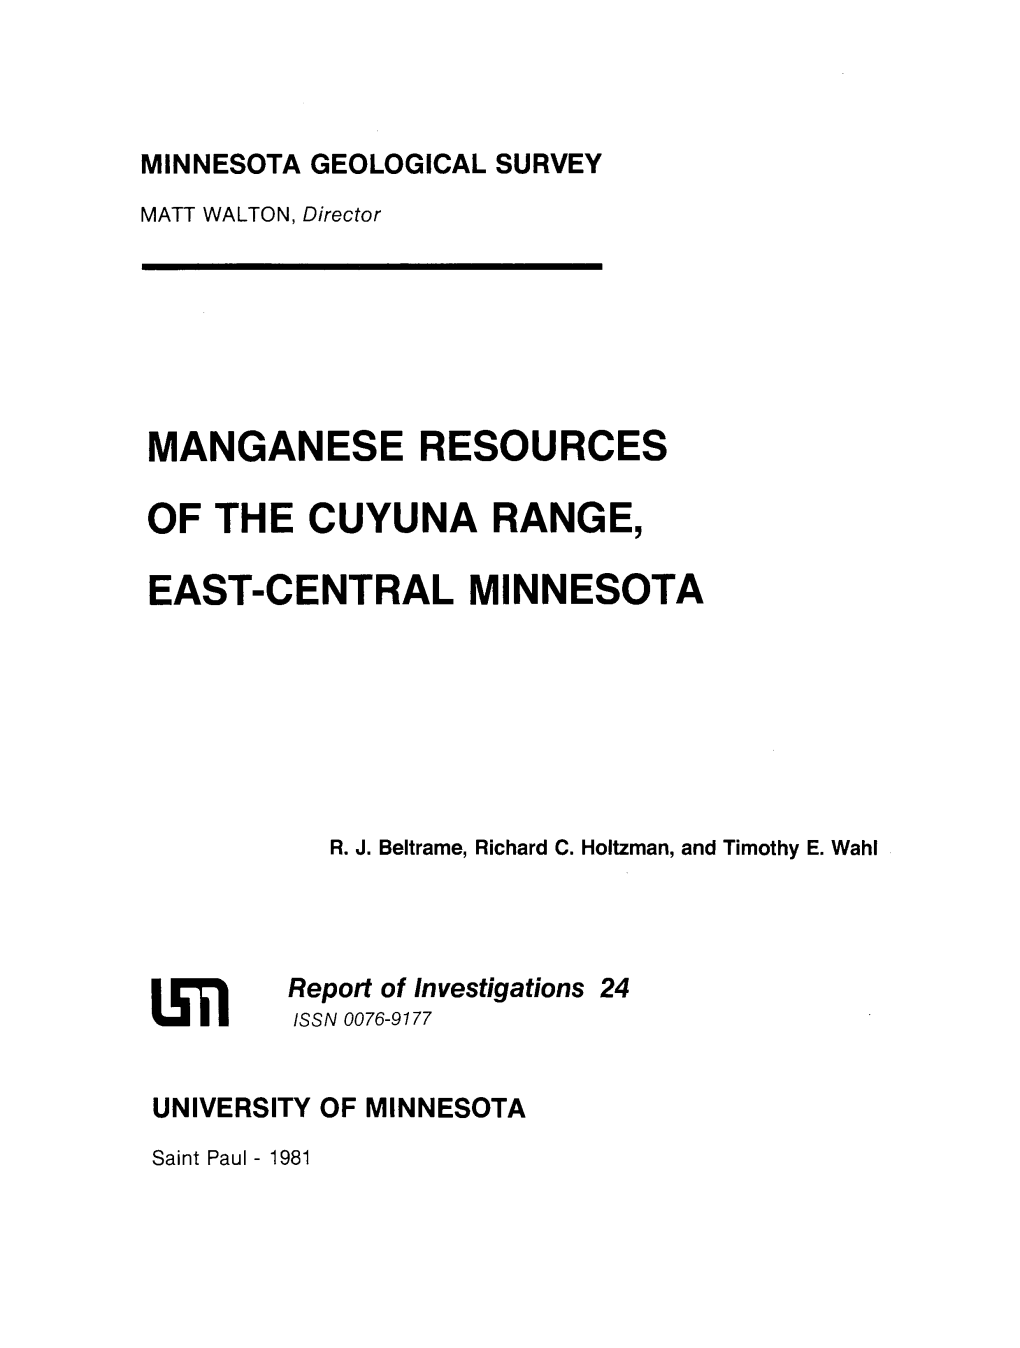 Manganese Resources of the Cuyuna Range, East-Central Minnesota